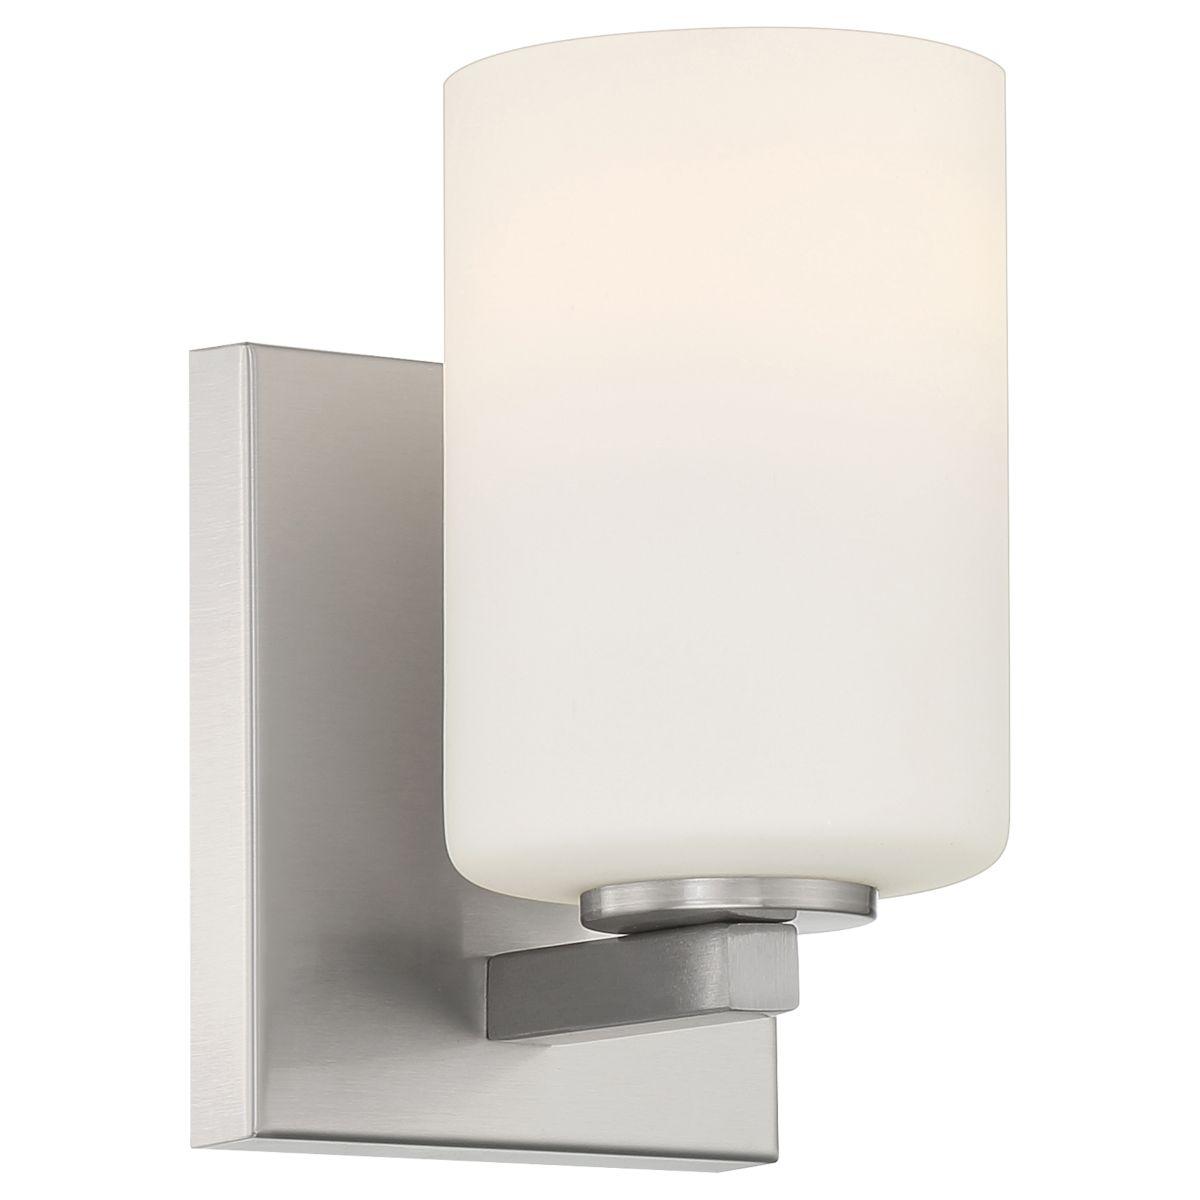 Sienna 7 in. Armed Sconce